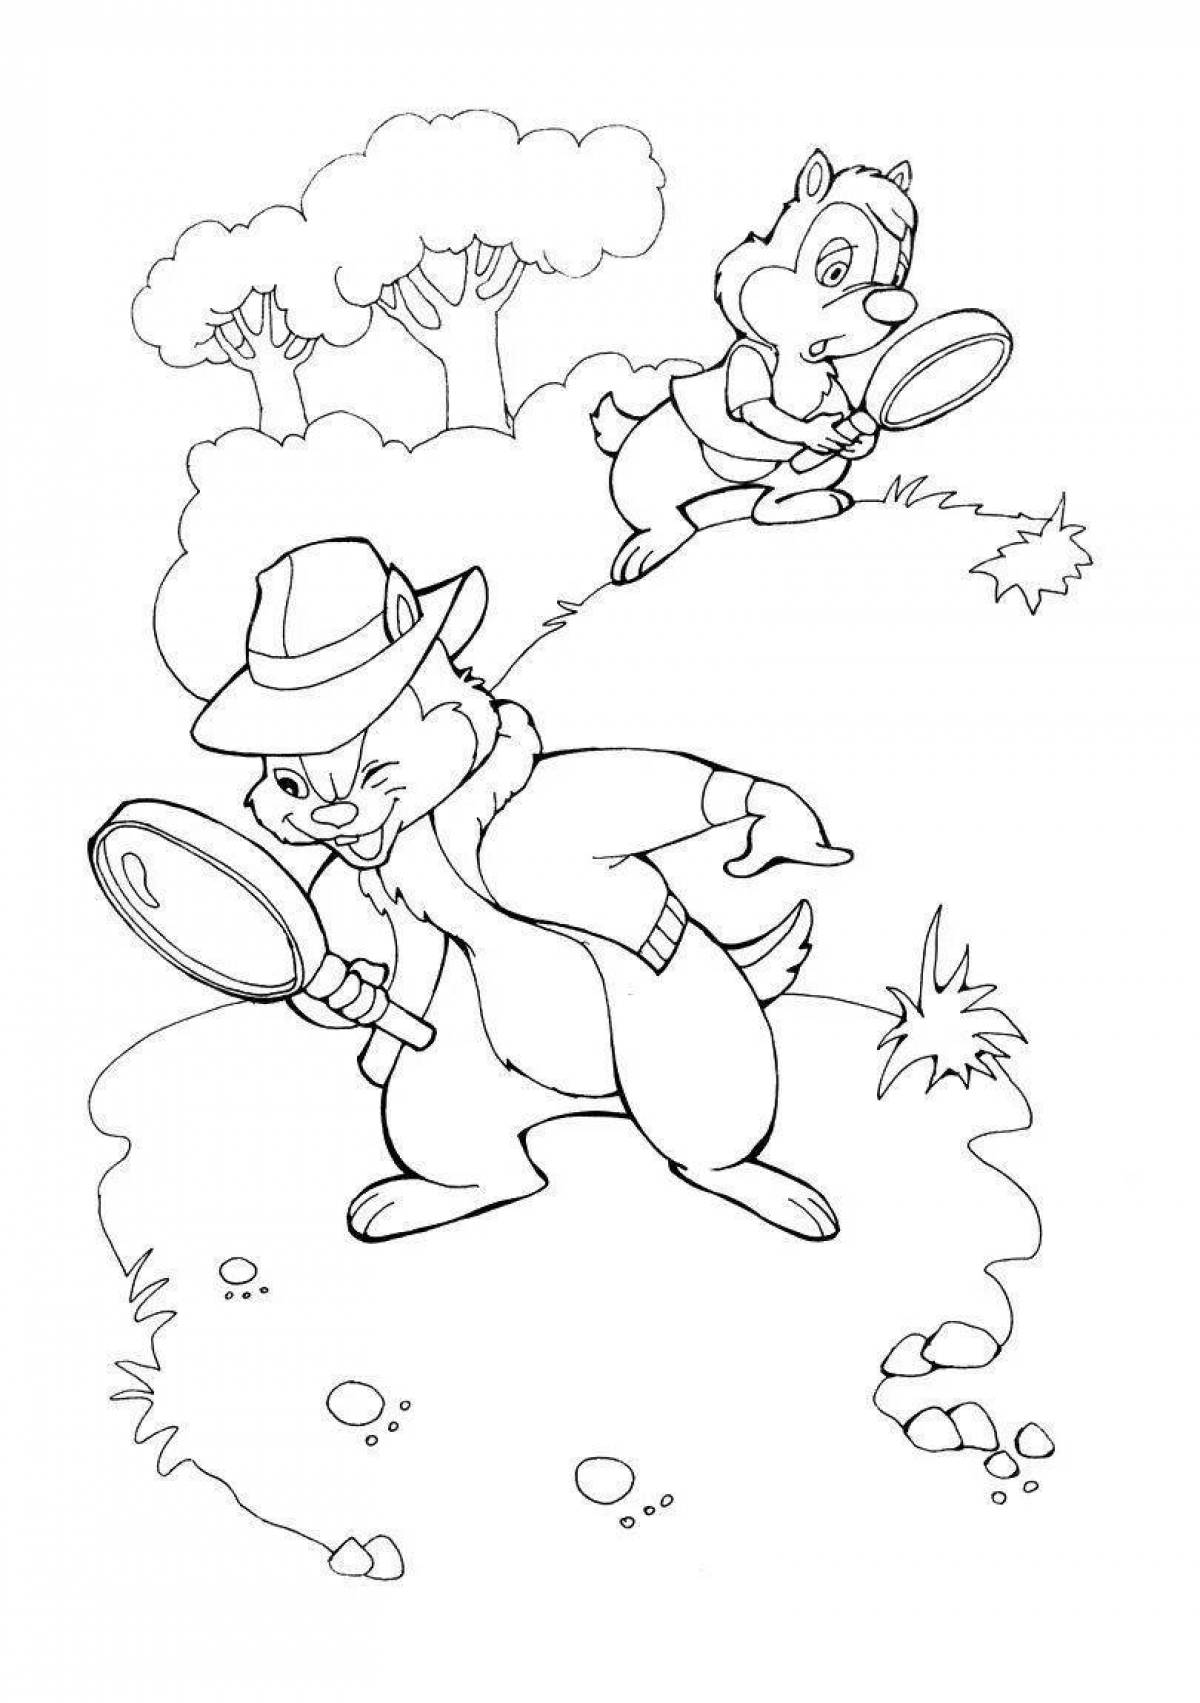 Chip and Dale coloring book for kids